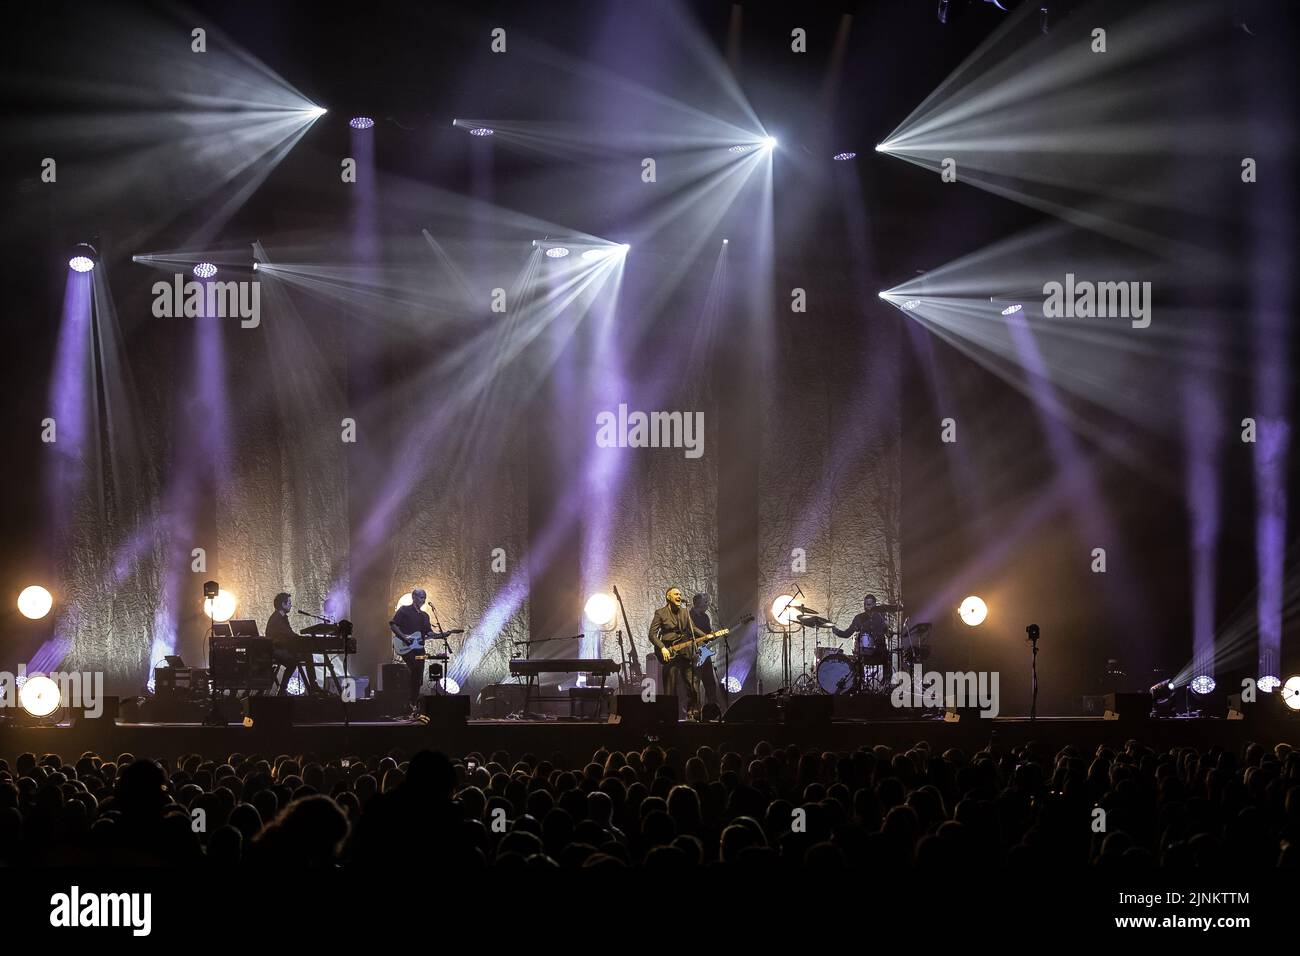 David Gray performing at the M&S Arena in Liverpool on 30th May 2022. Stock Photo